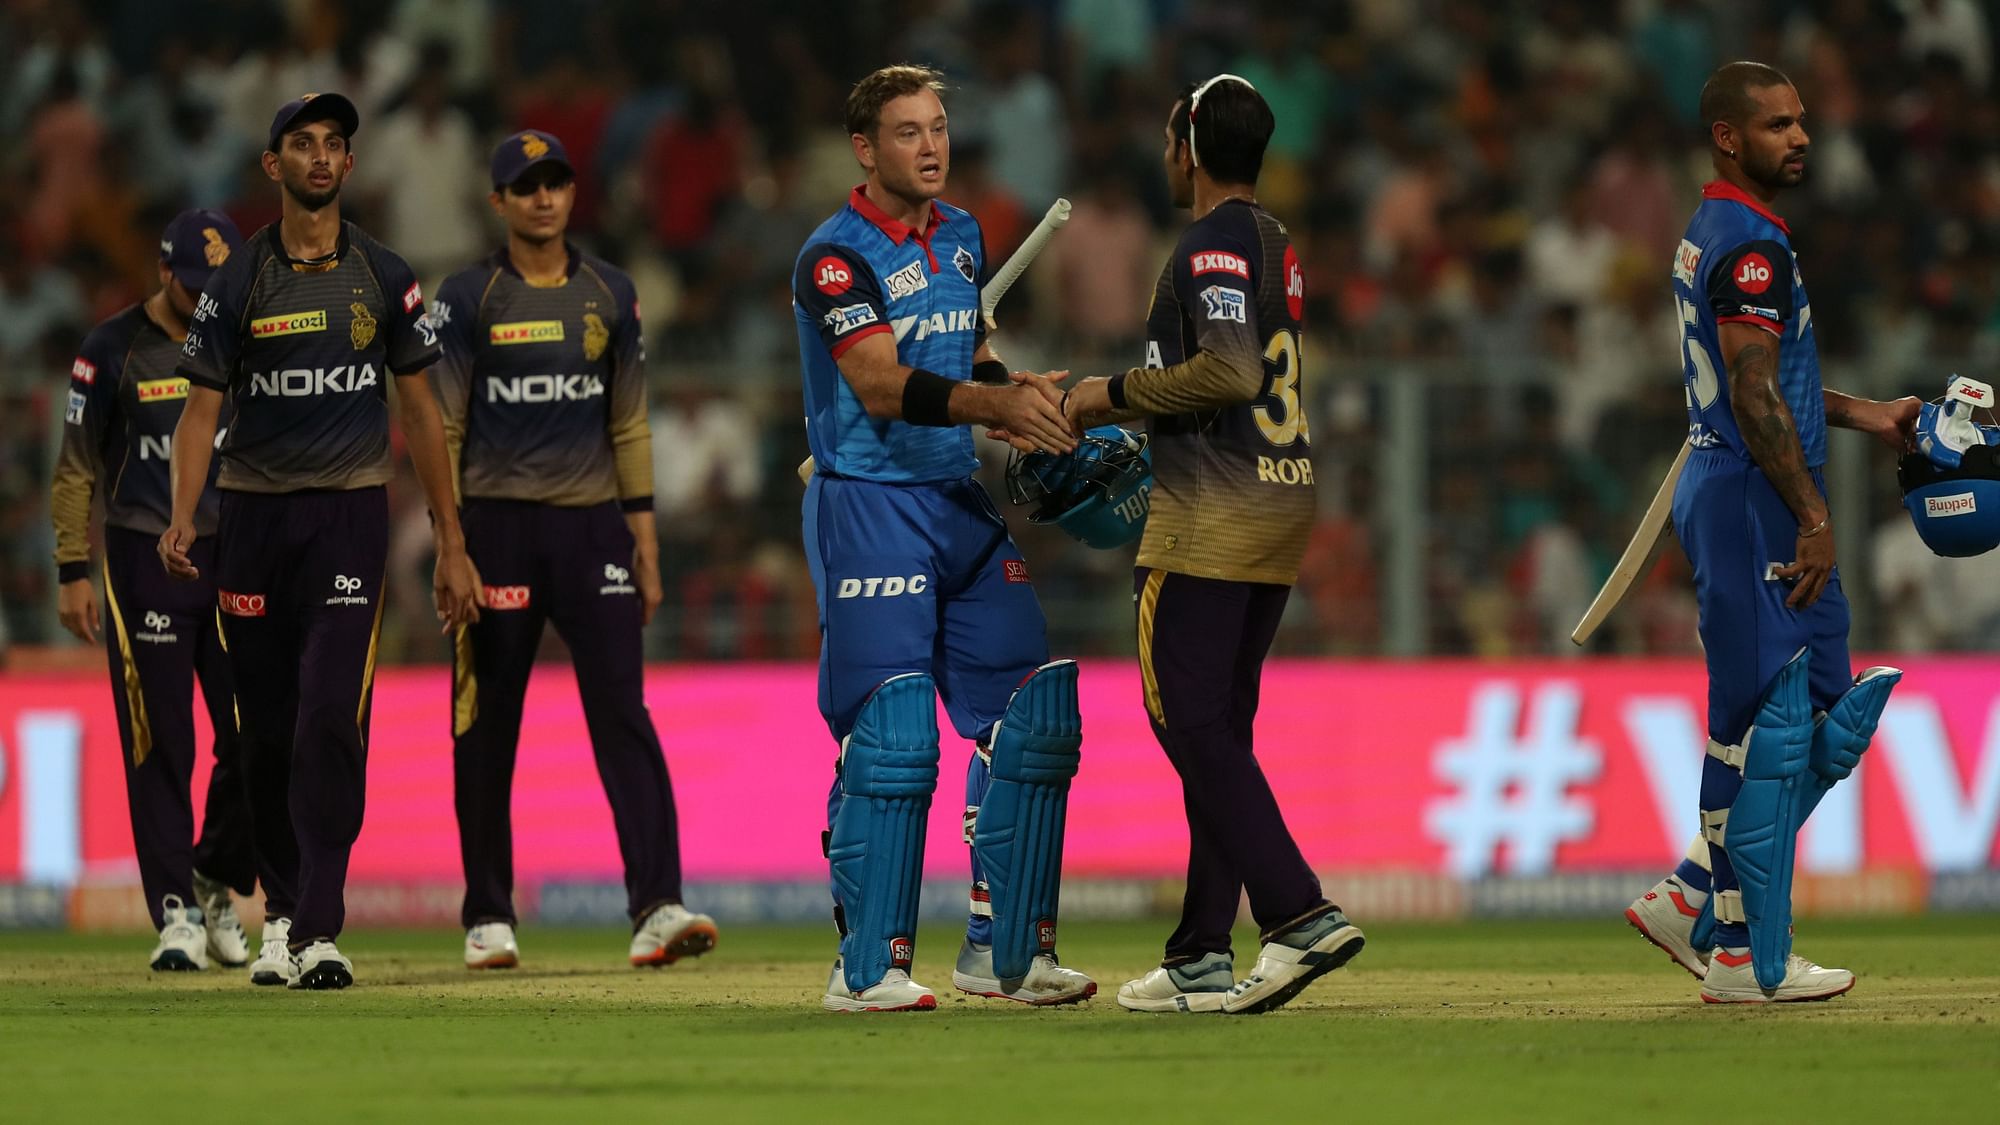 Delhi climbed to fourth spot with eight points from seven matches, while this was KKR’s second straight defeat.